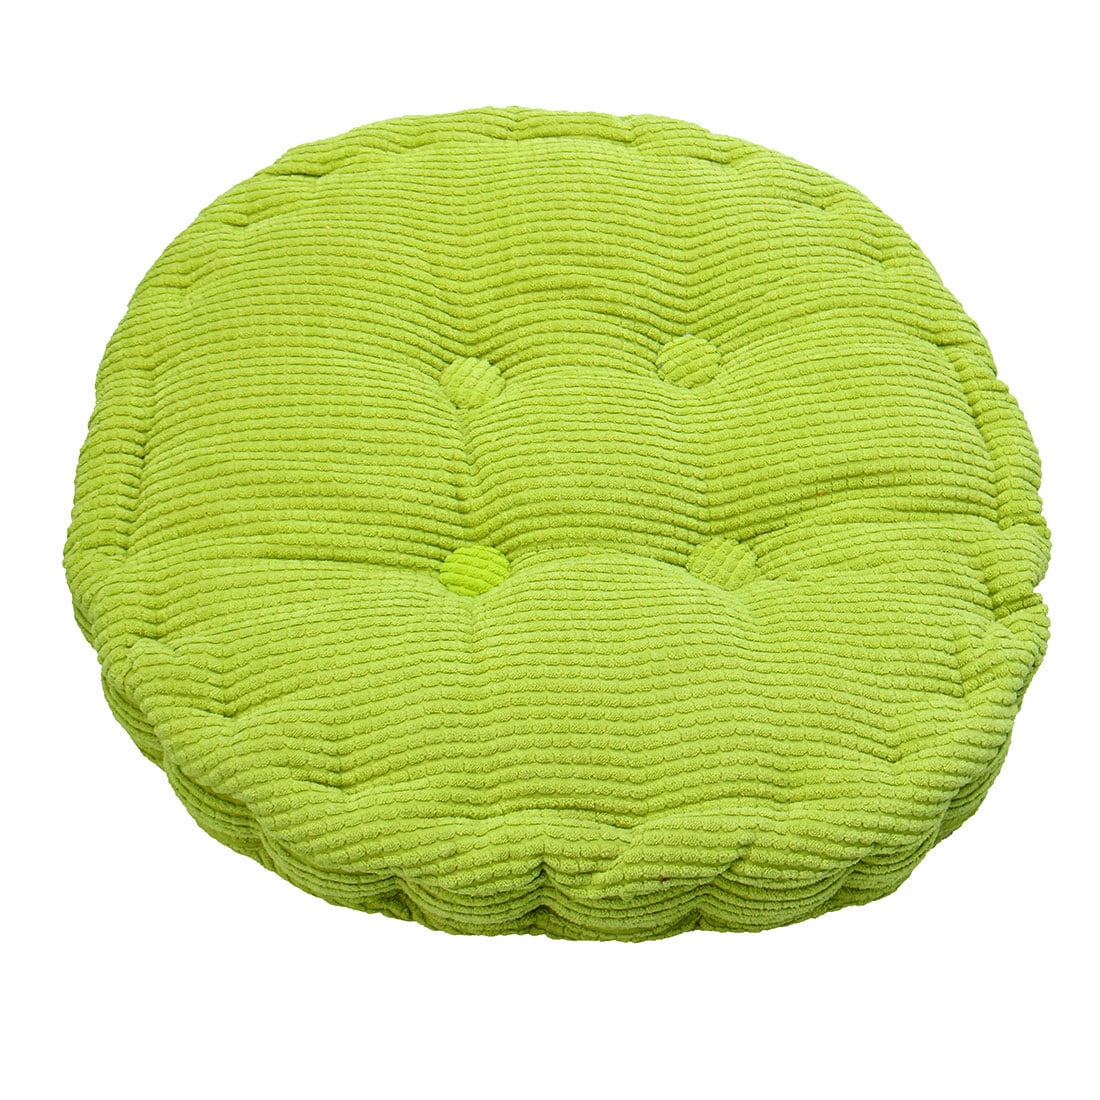 Details about   35cm Dia Round Fluffy Stool Chair Seat Cushion Mat Cover Floor Cushion White 